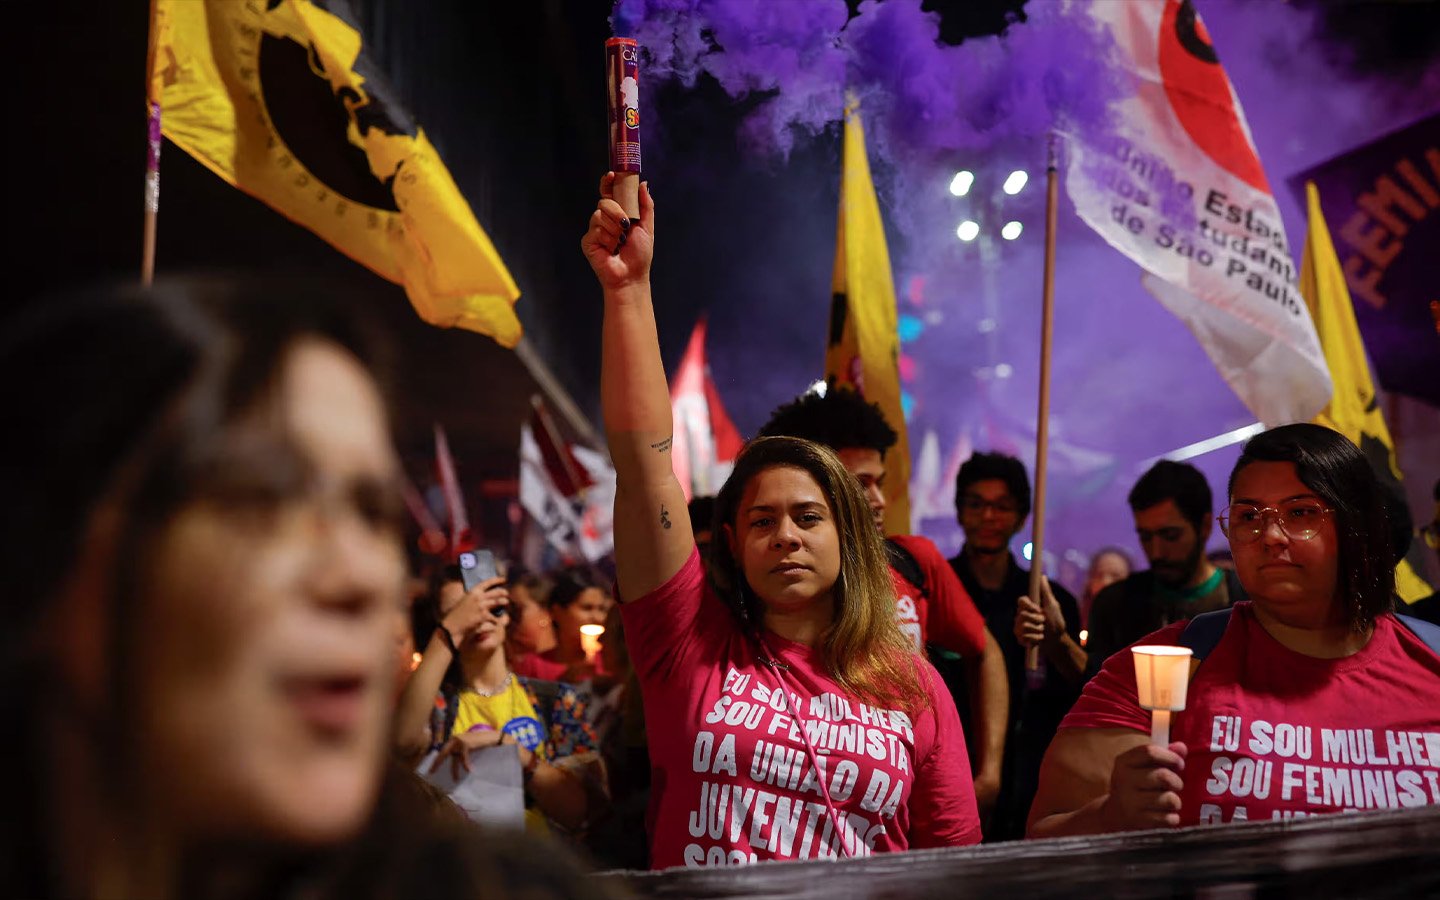 Violence against women continues to rise in Brazil